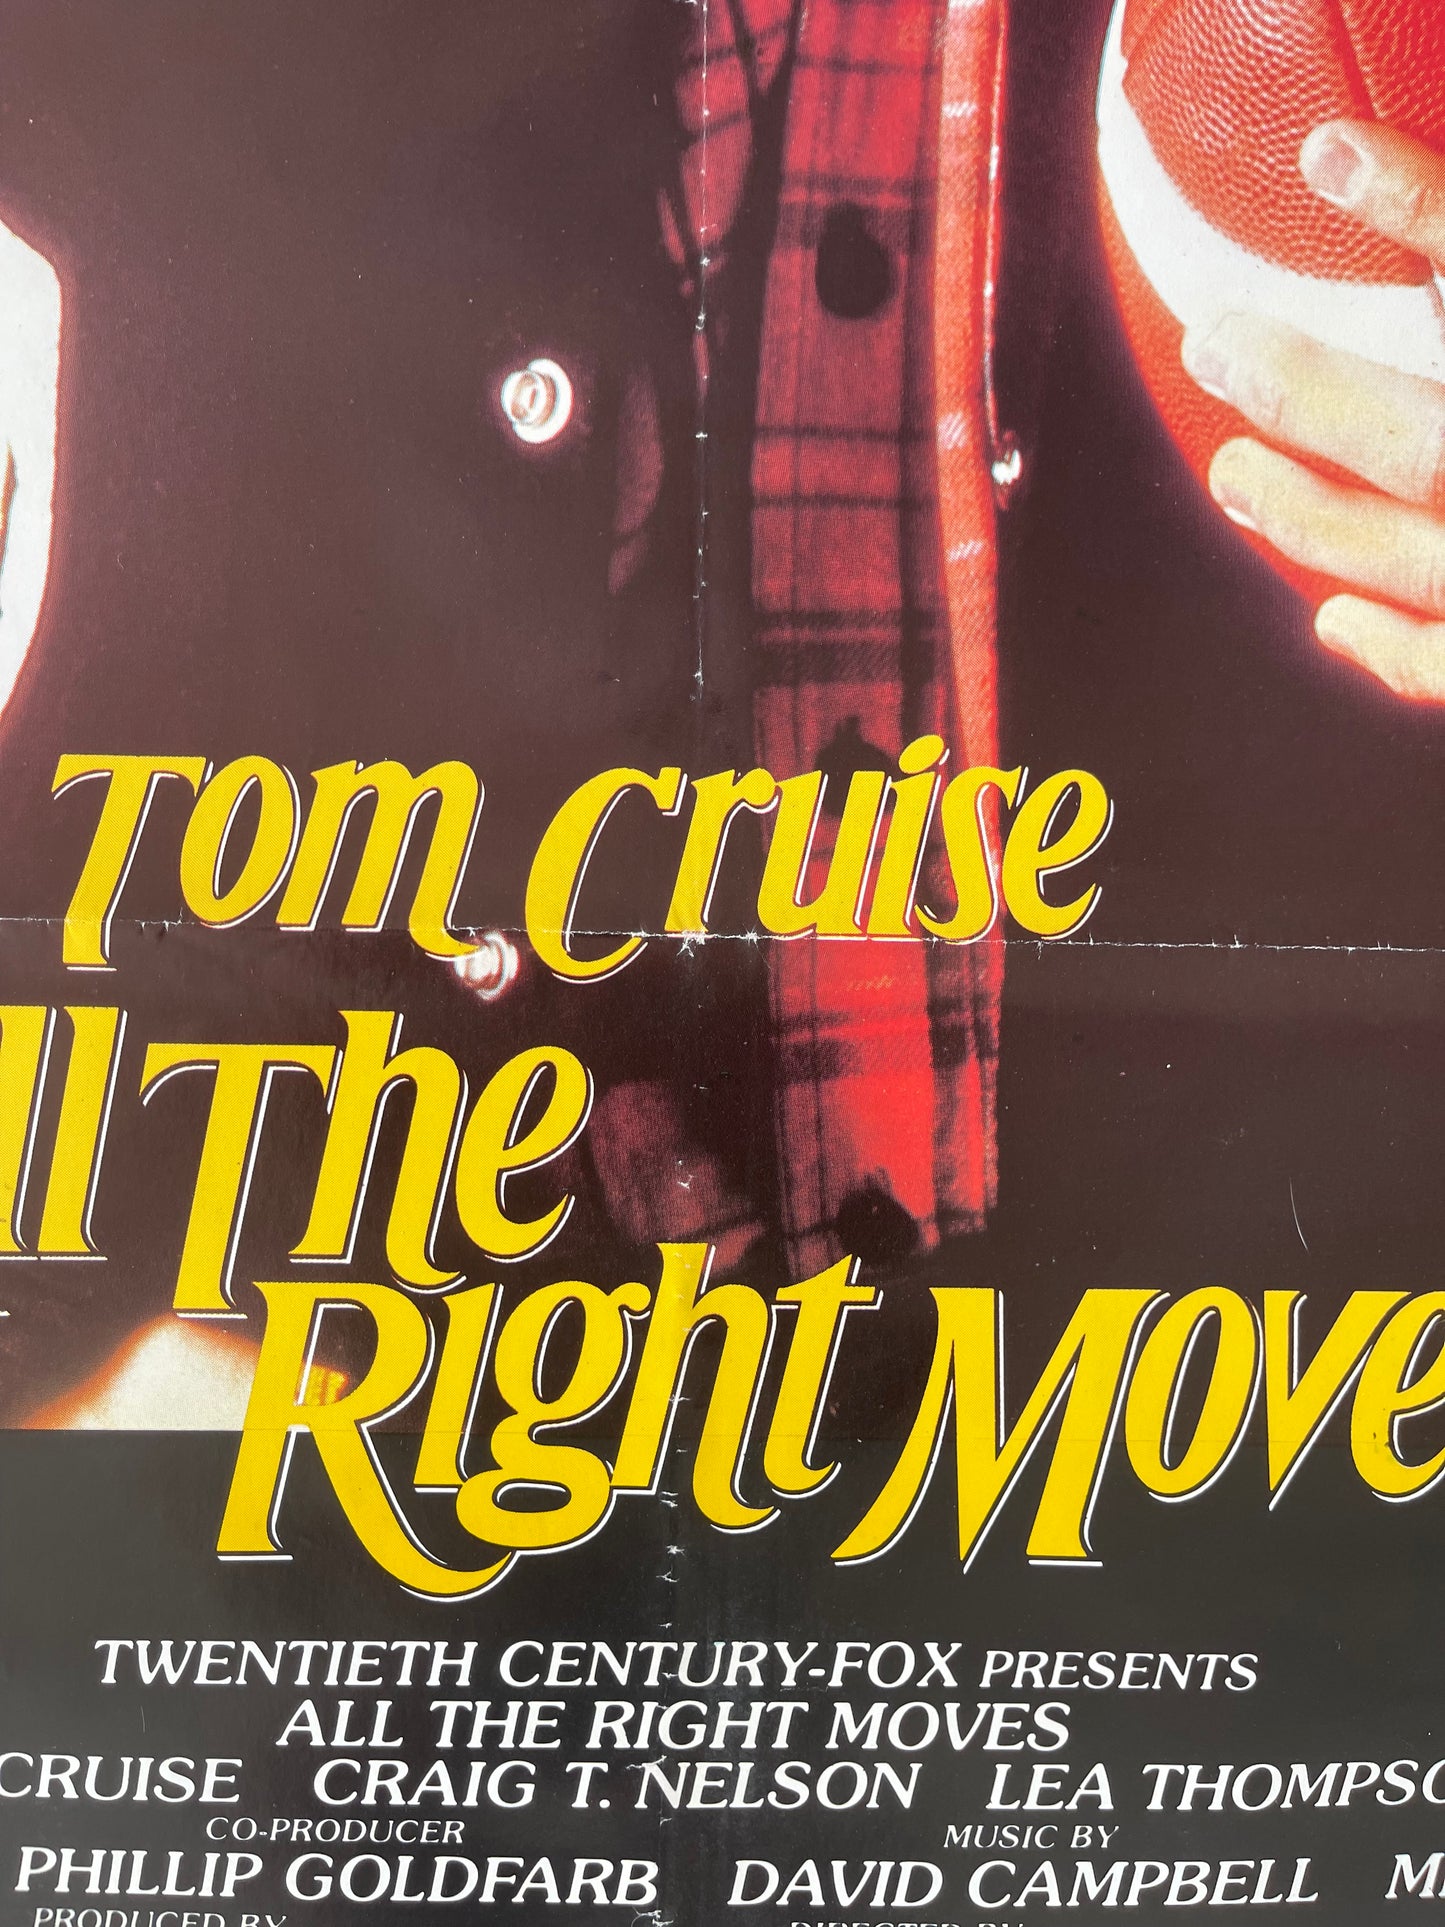 All The Right Moves (1983) Tom Cruise - One Sheet